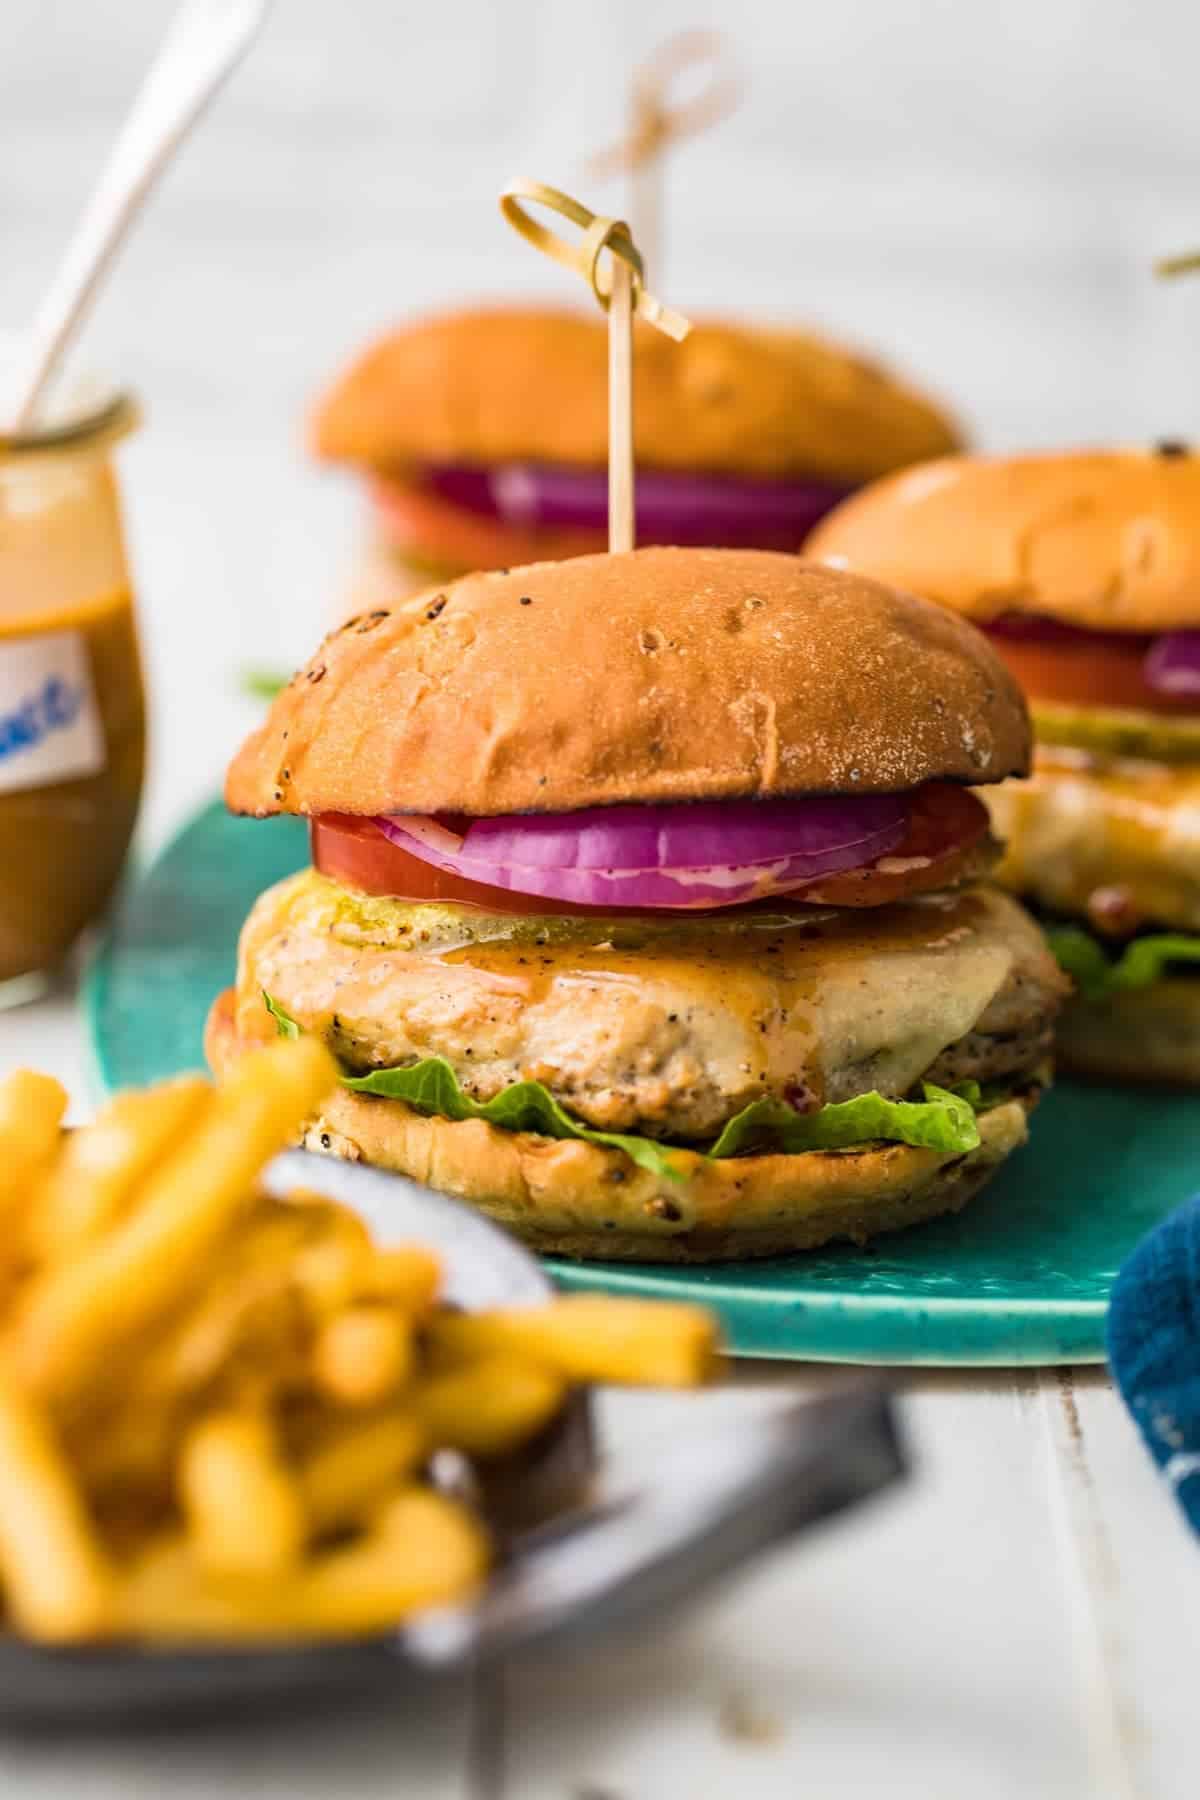 A juicy chicken burger with melted cheese